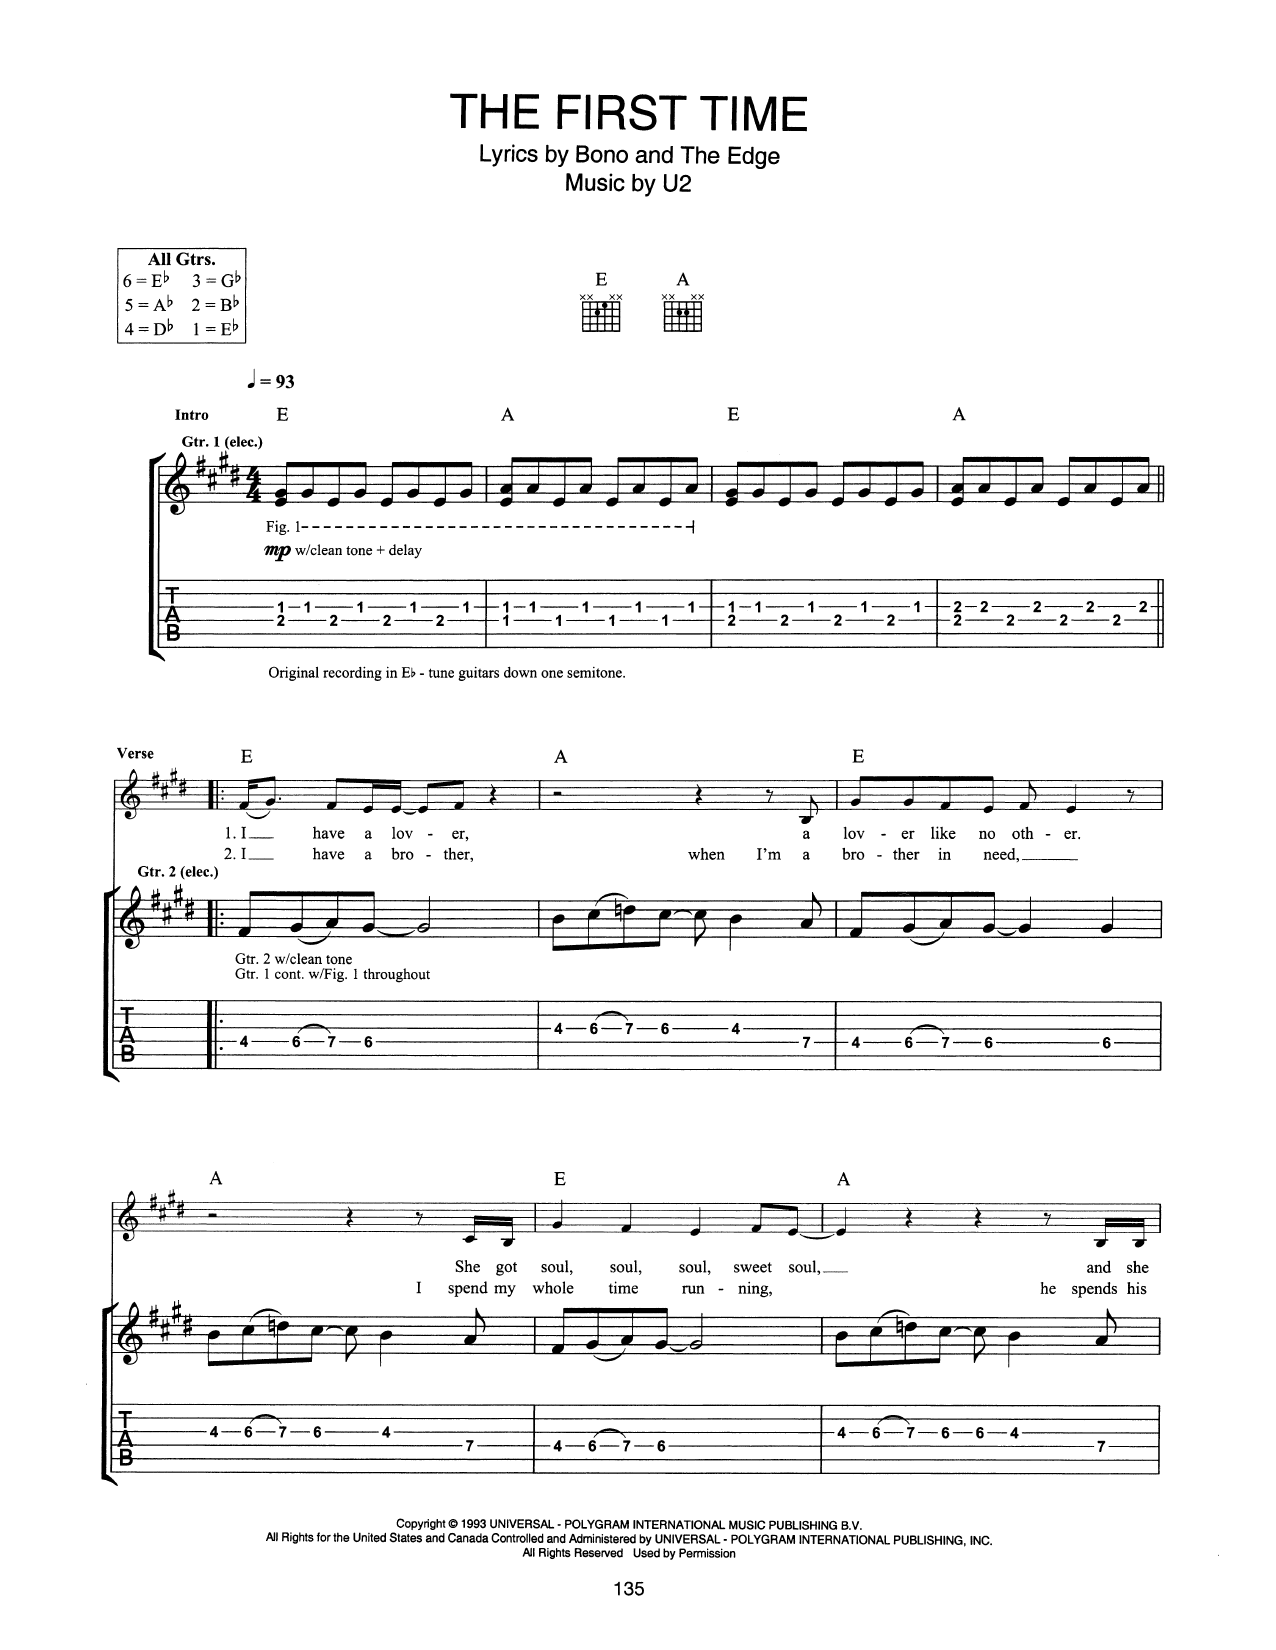 Download U2 The First Time Sheet Music